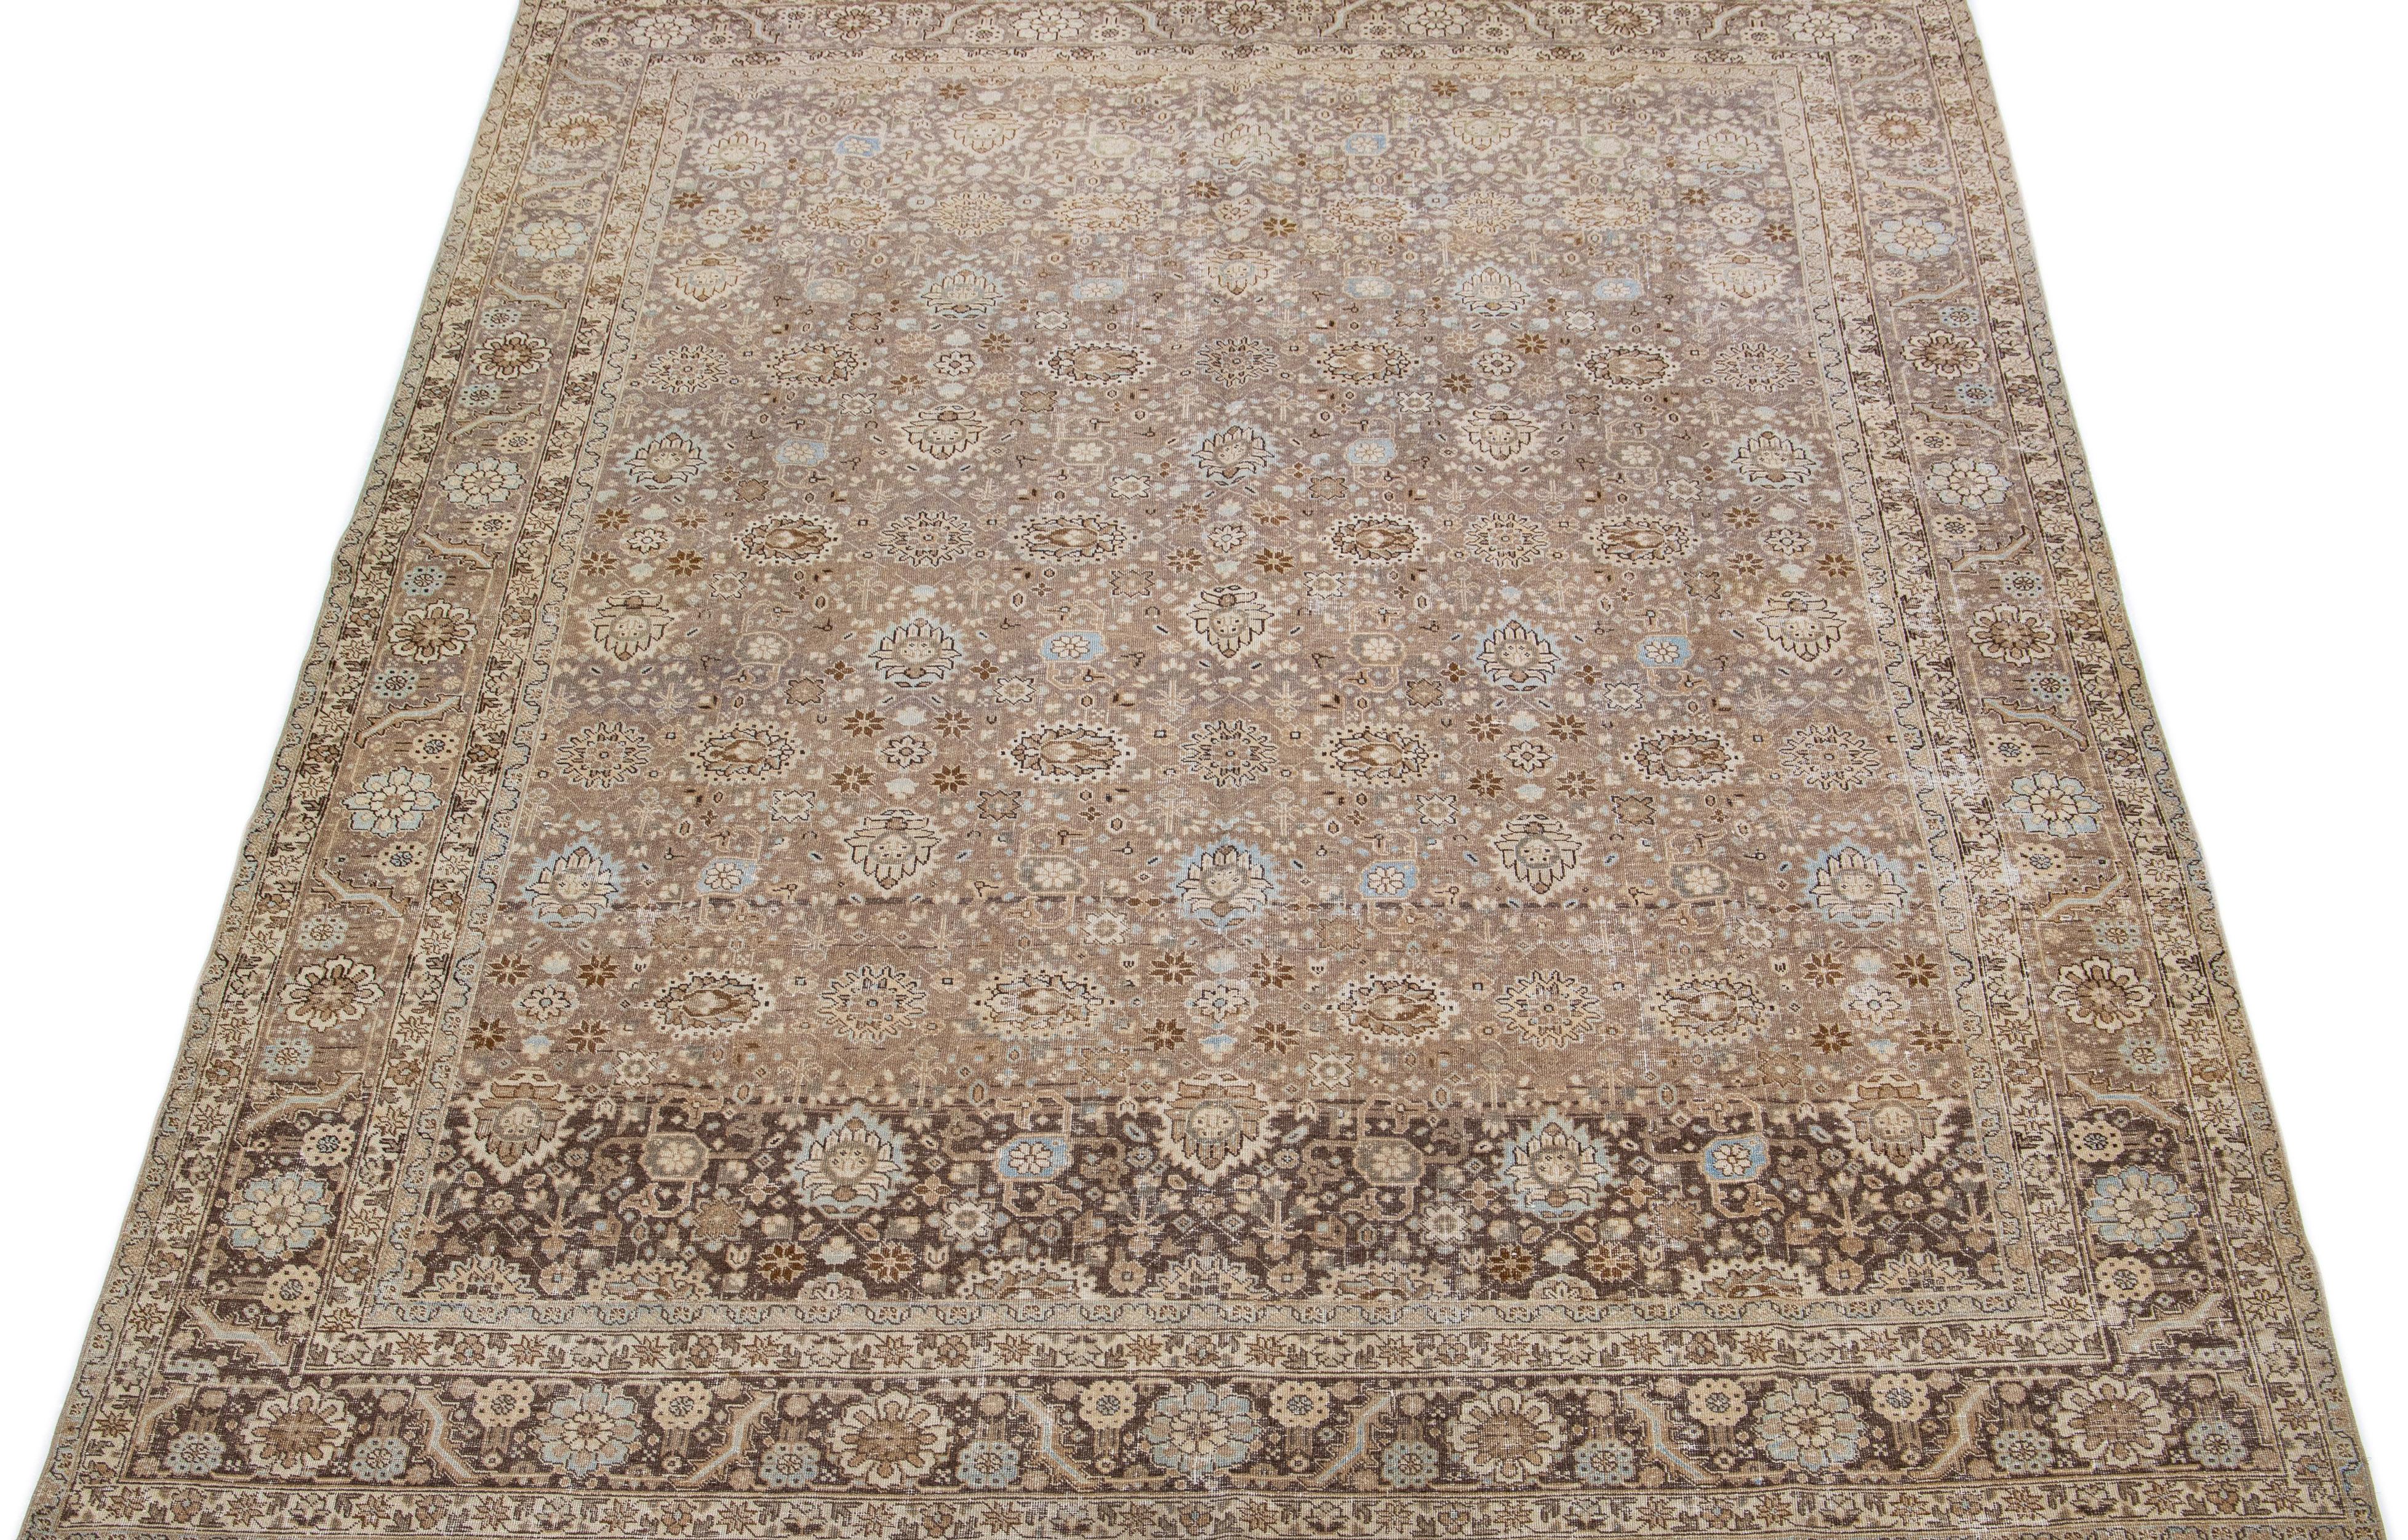 Beautiful antique Tabriz Persian hand-knotted wool rug with a gray color field. This piece has a designed frame with blue, beige, and brown accents in a gorgeous all-over floral design.

This rug measures: 8'6' x 12'1